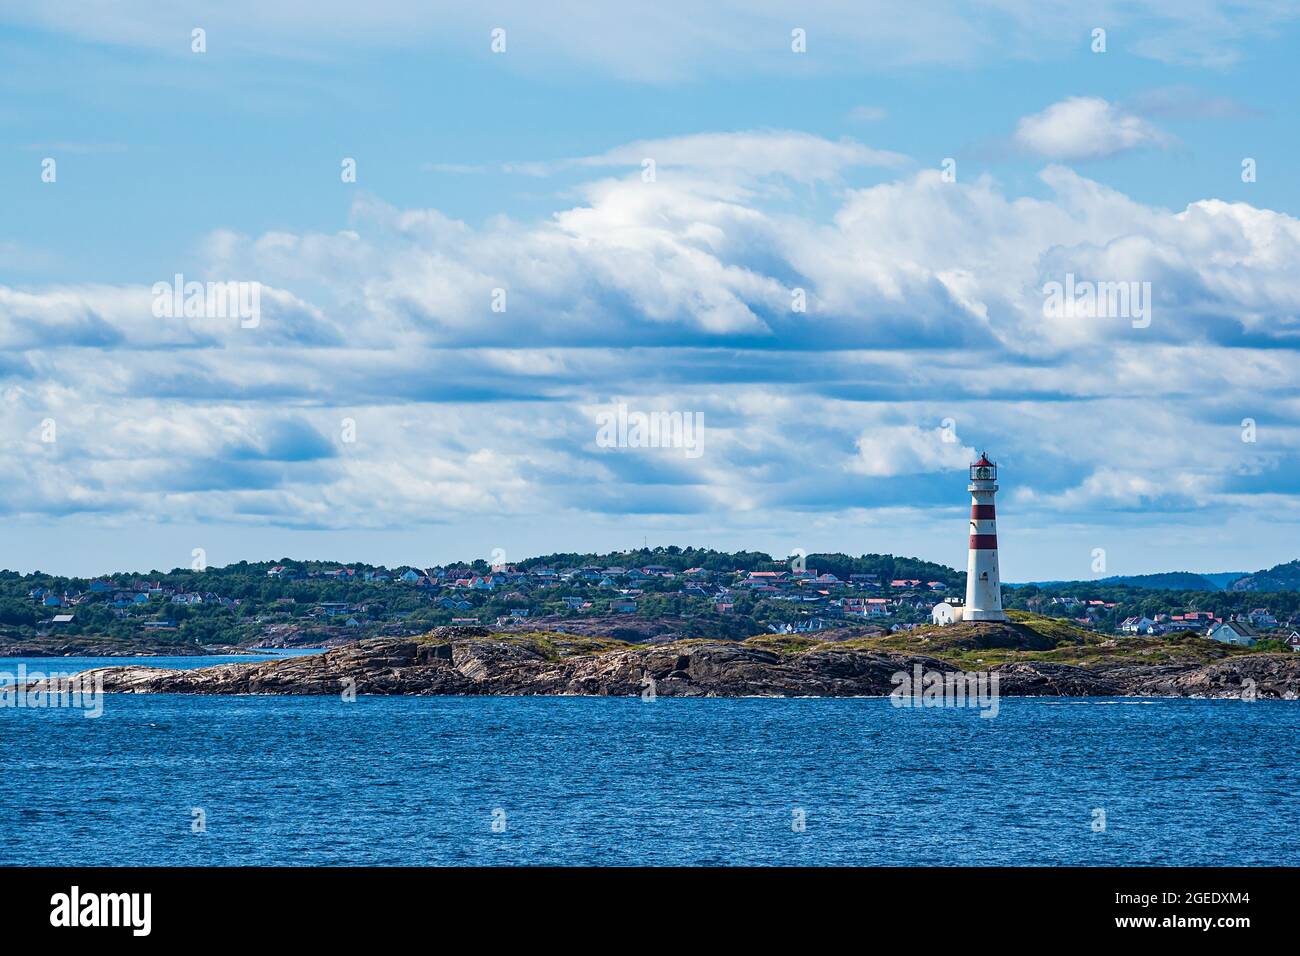 View to the lighthouse Oksøy Fyr near Kristiansand in Norway. Stock Photo